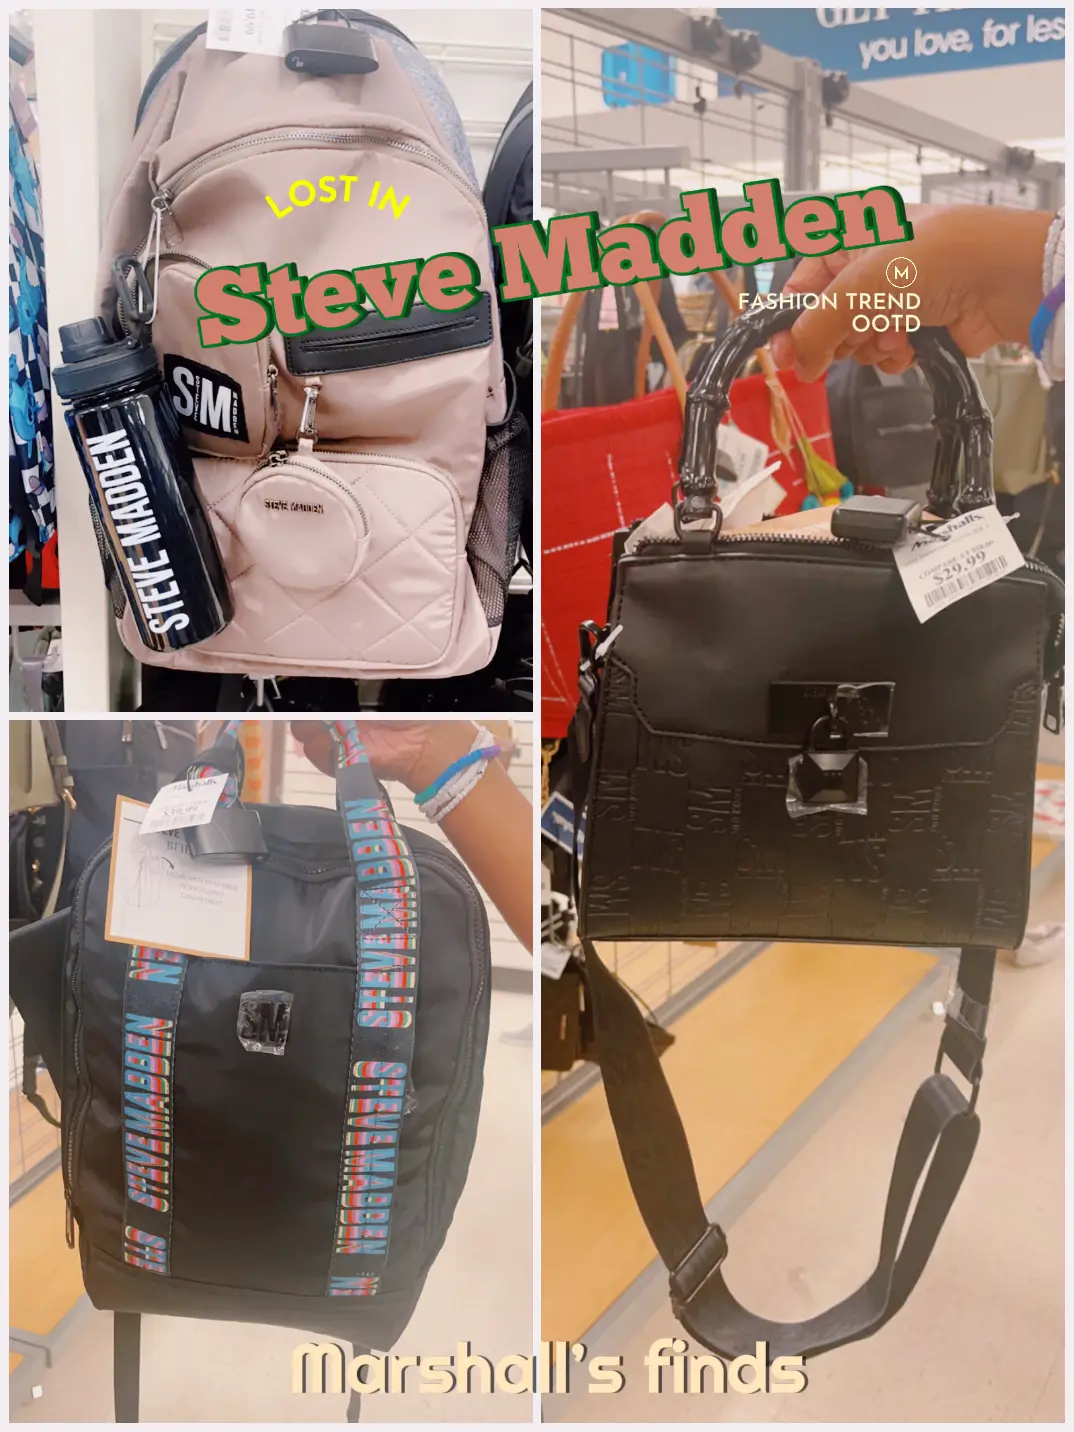 Steve Madden collection at Marshall's